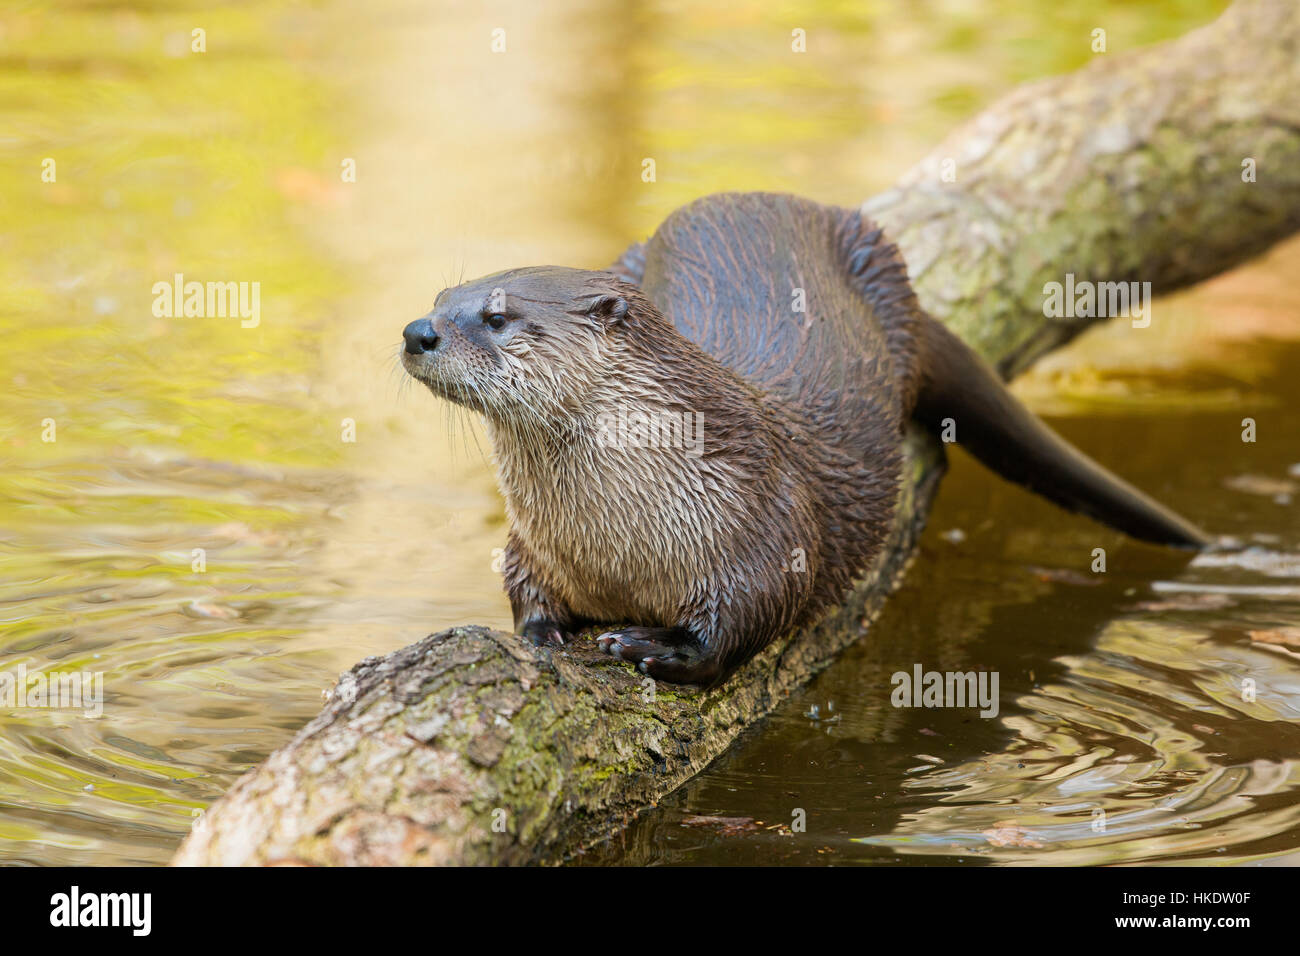 Common otter (Lutra lutra) on log in water, captive, Germany Stock Photo